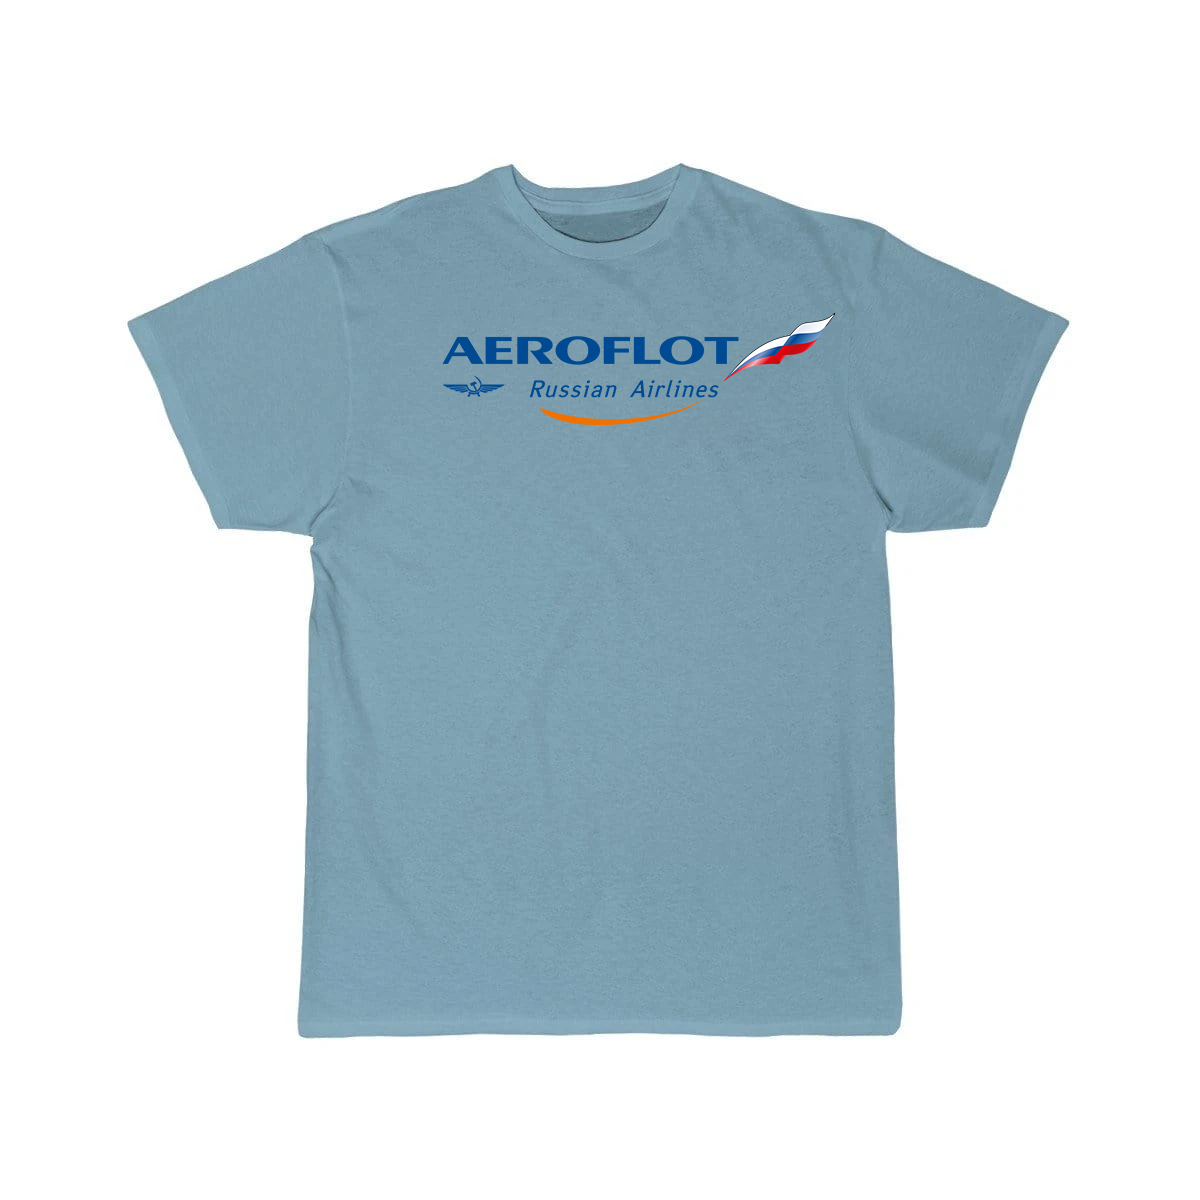 RUSSIAN AIRLINE T-SHIRT